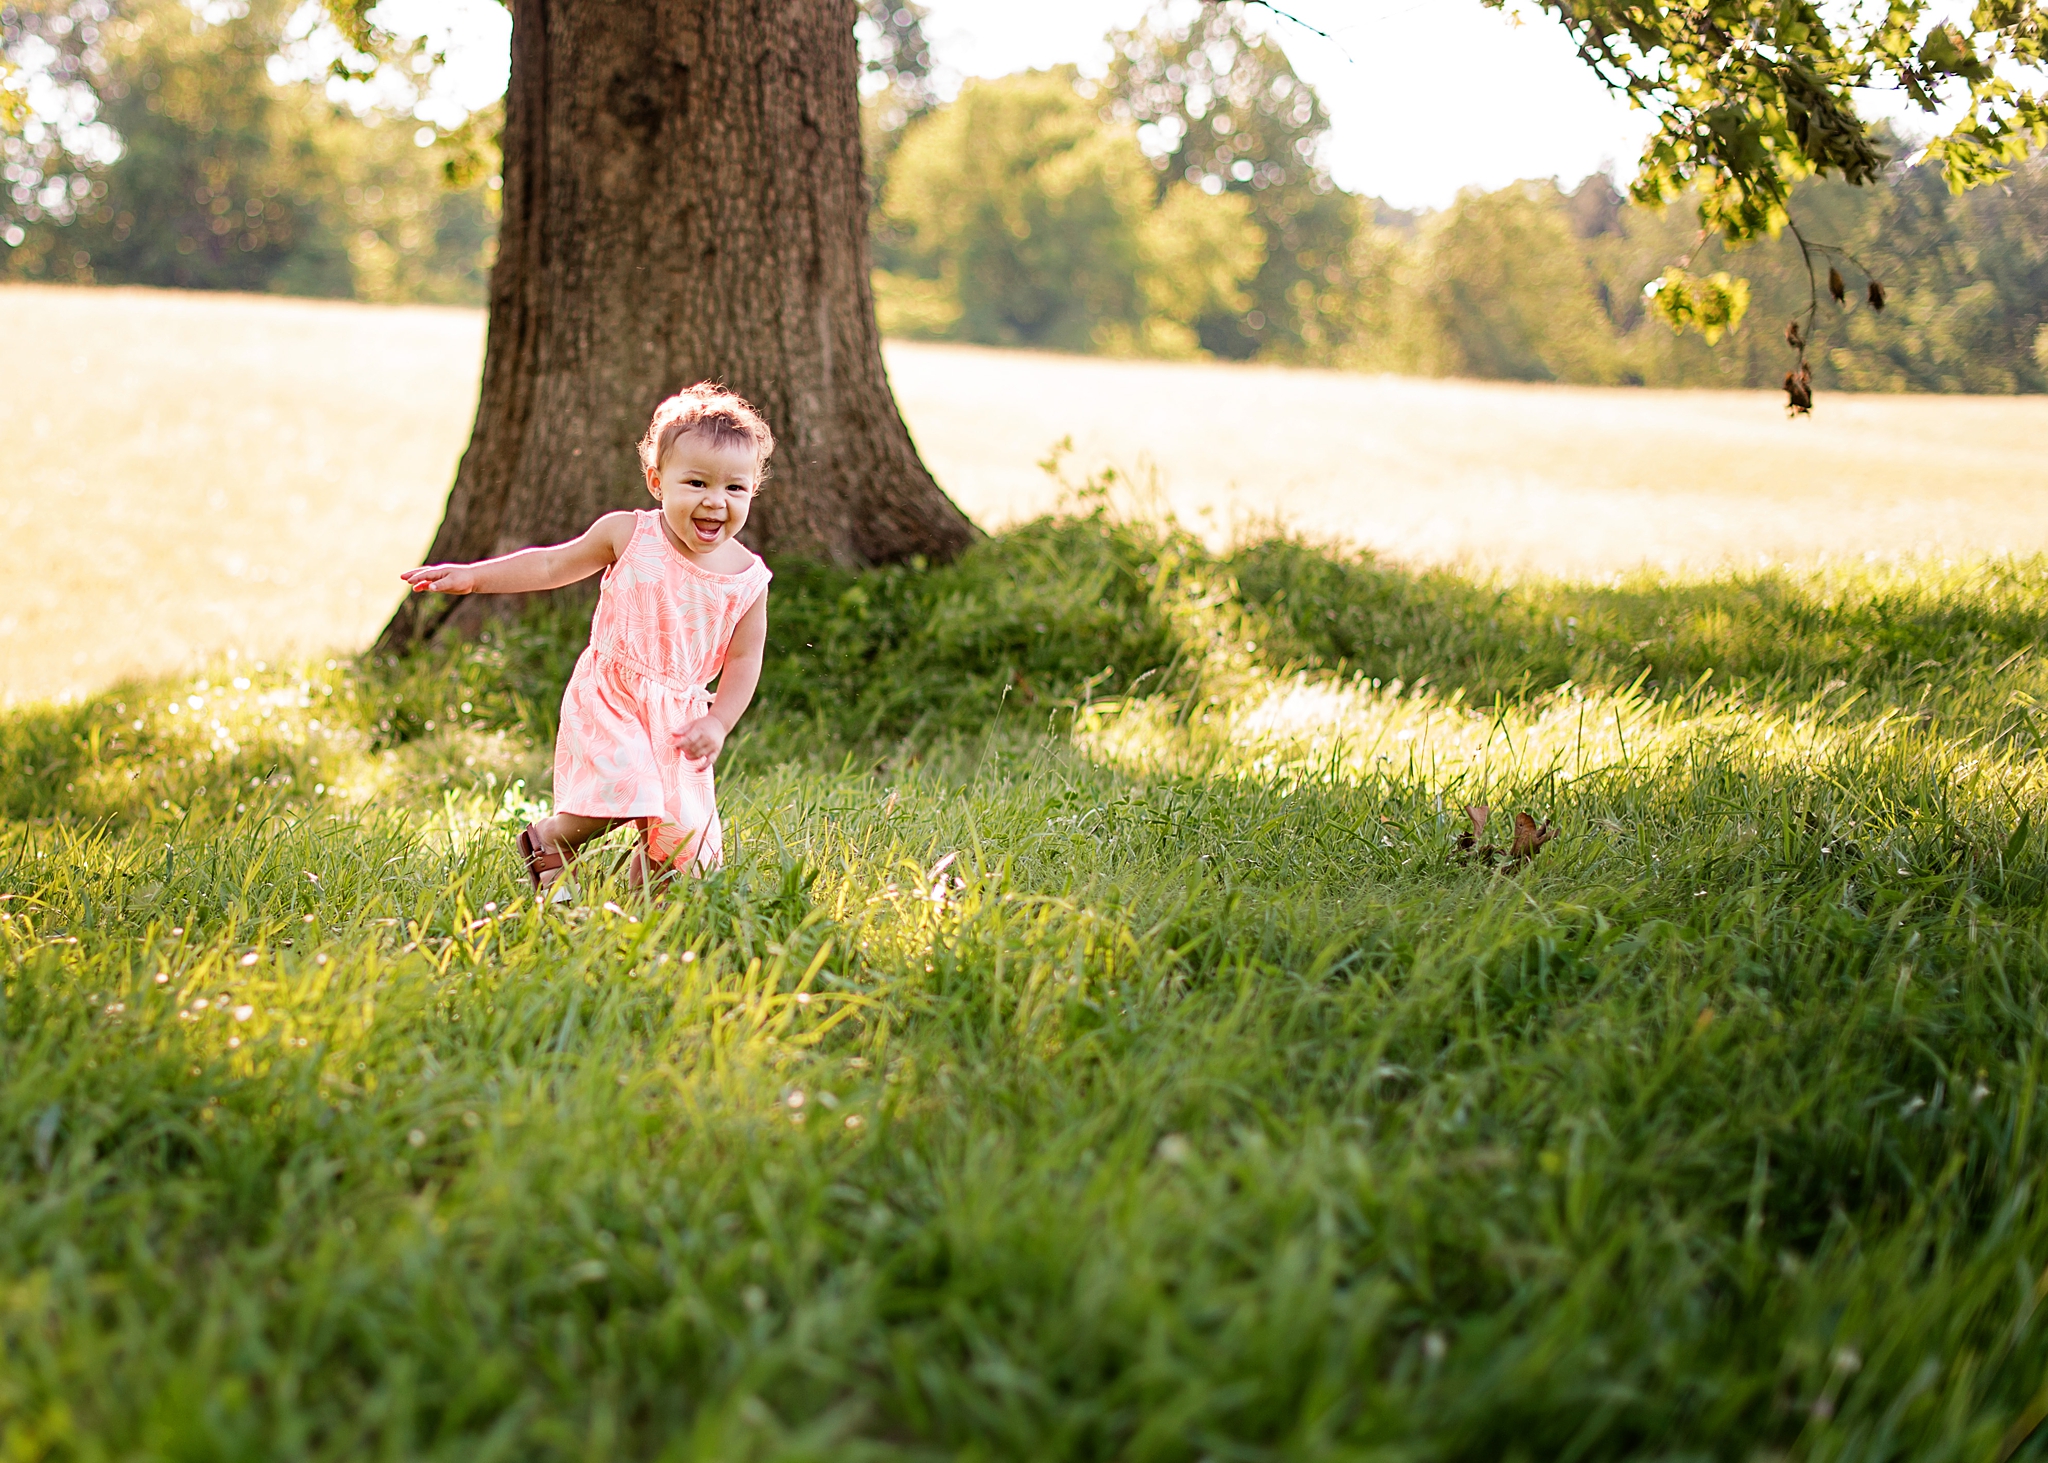 Children Session | Isabella in a field | Lori Pickens Photography